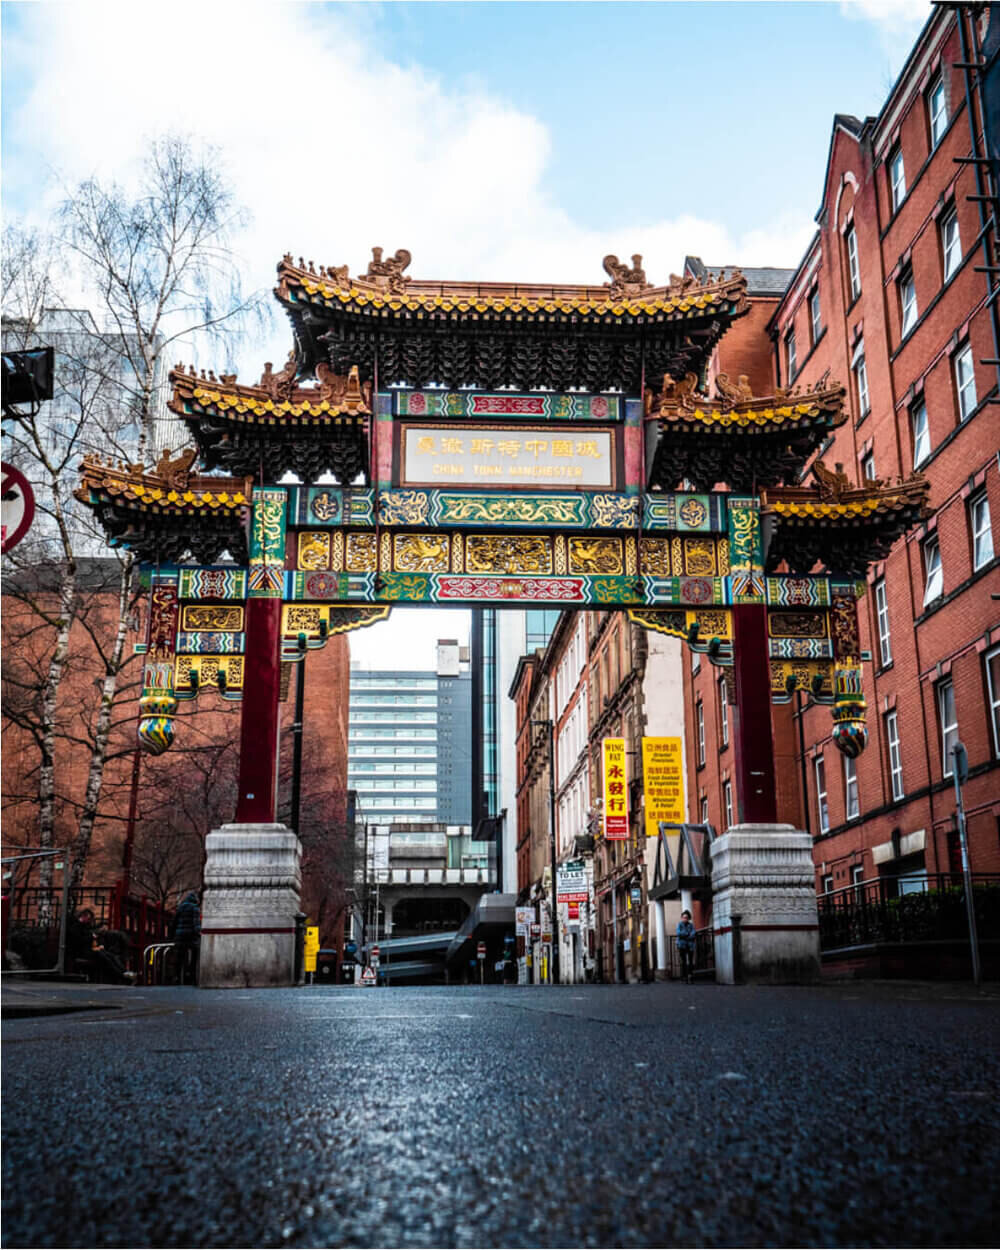 Giant arch in Manchester's Chinatown, popular photography spot